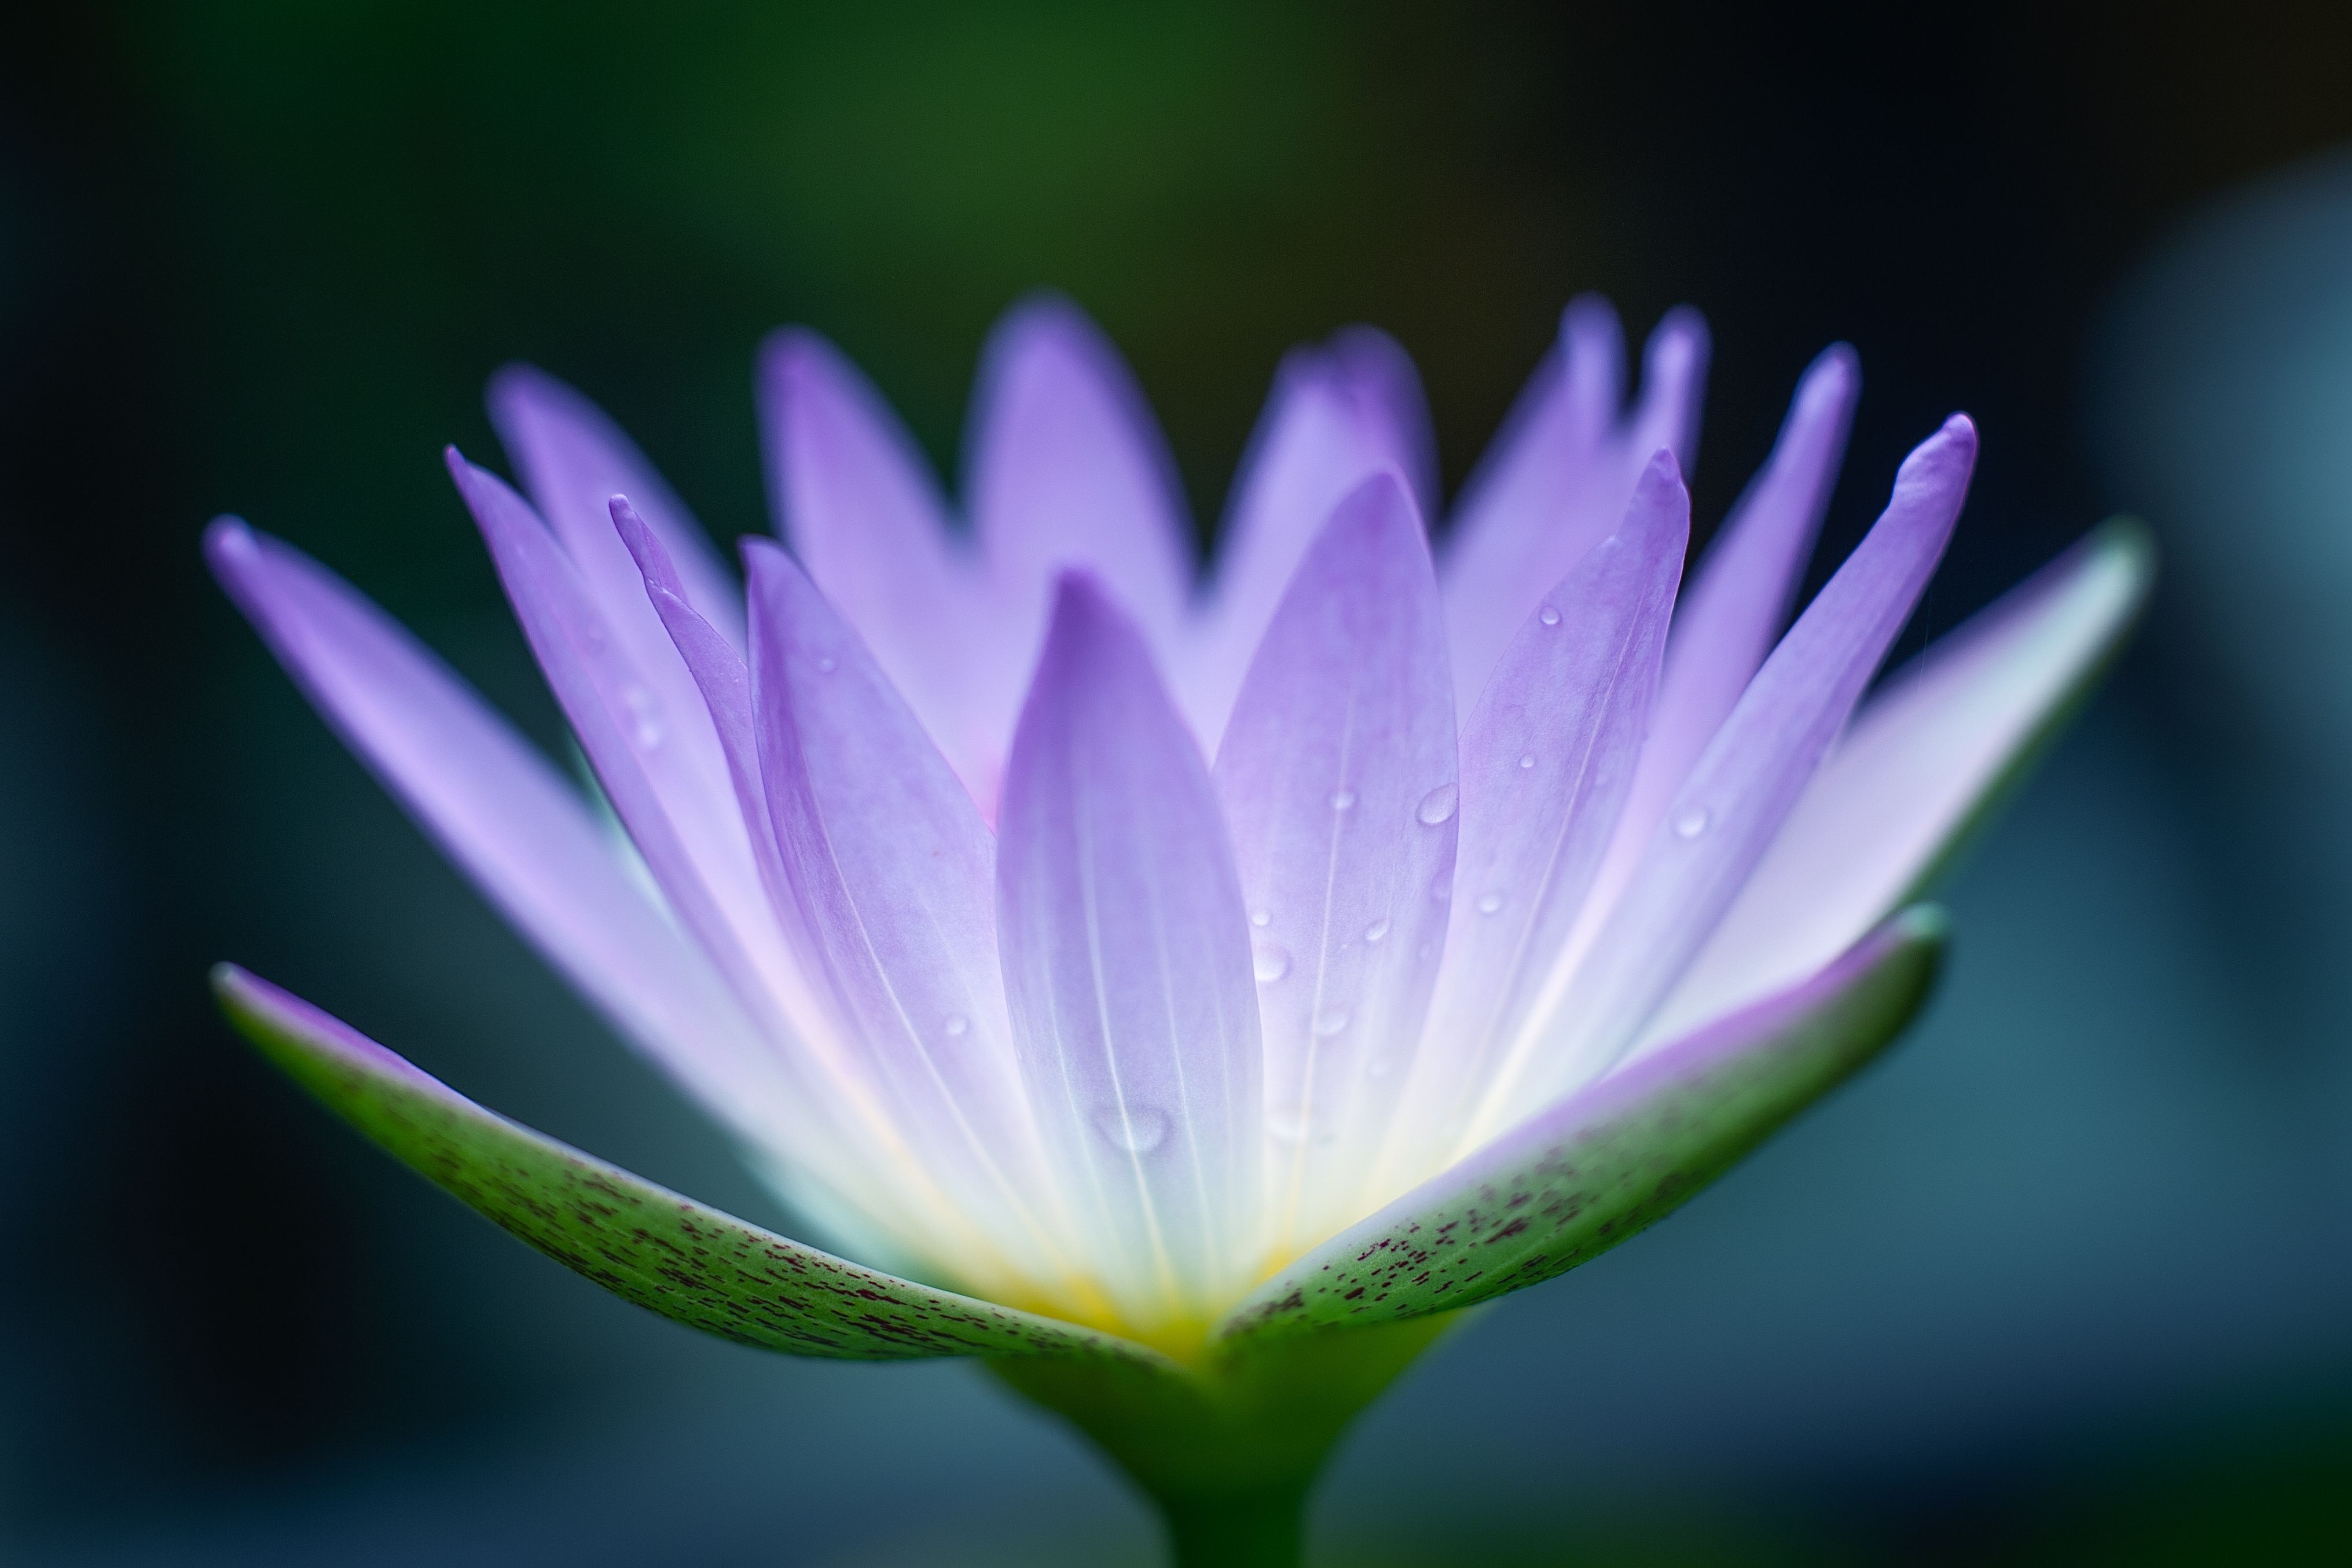 The Many Symbolic Meanings of the Lotus in Buddhism